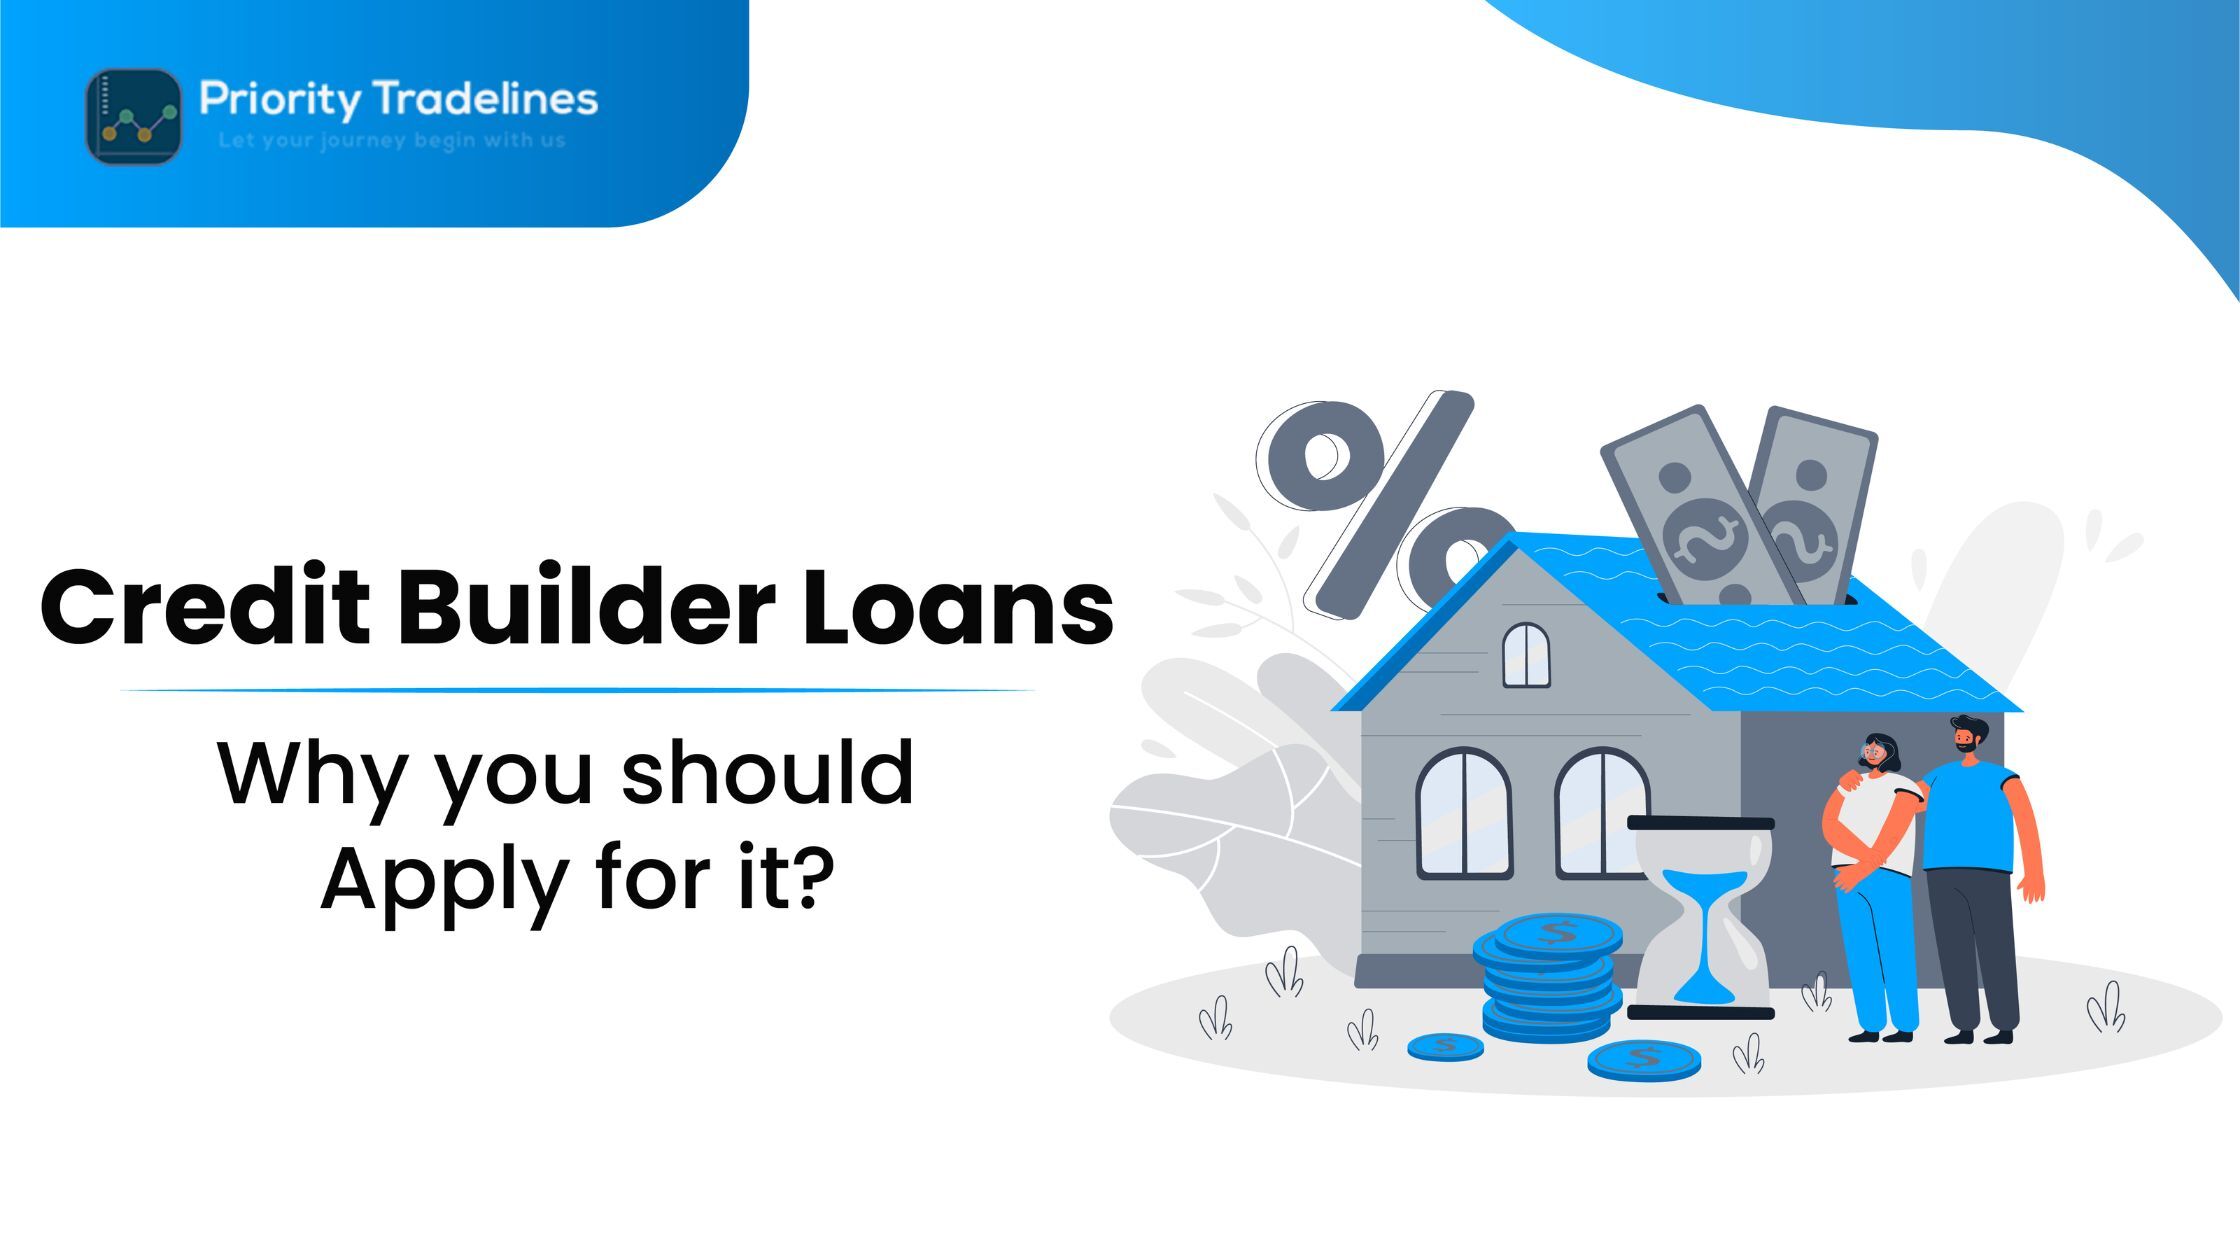 Credit Builder Loans | Why you should apply for it?